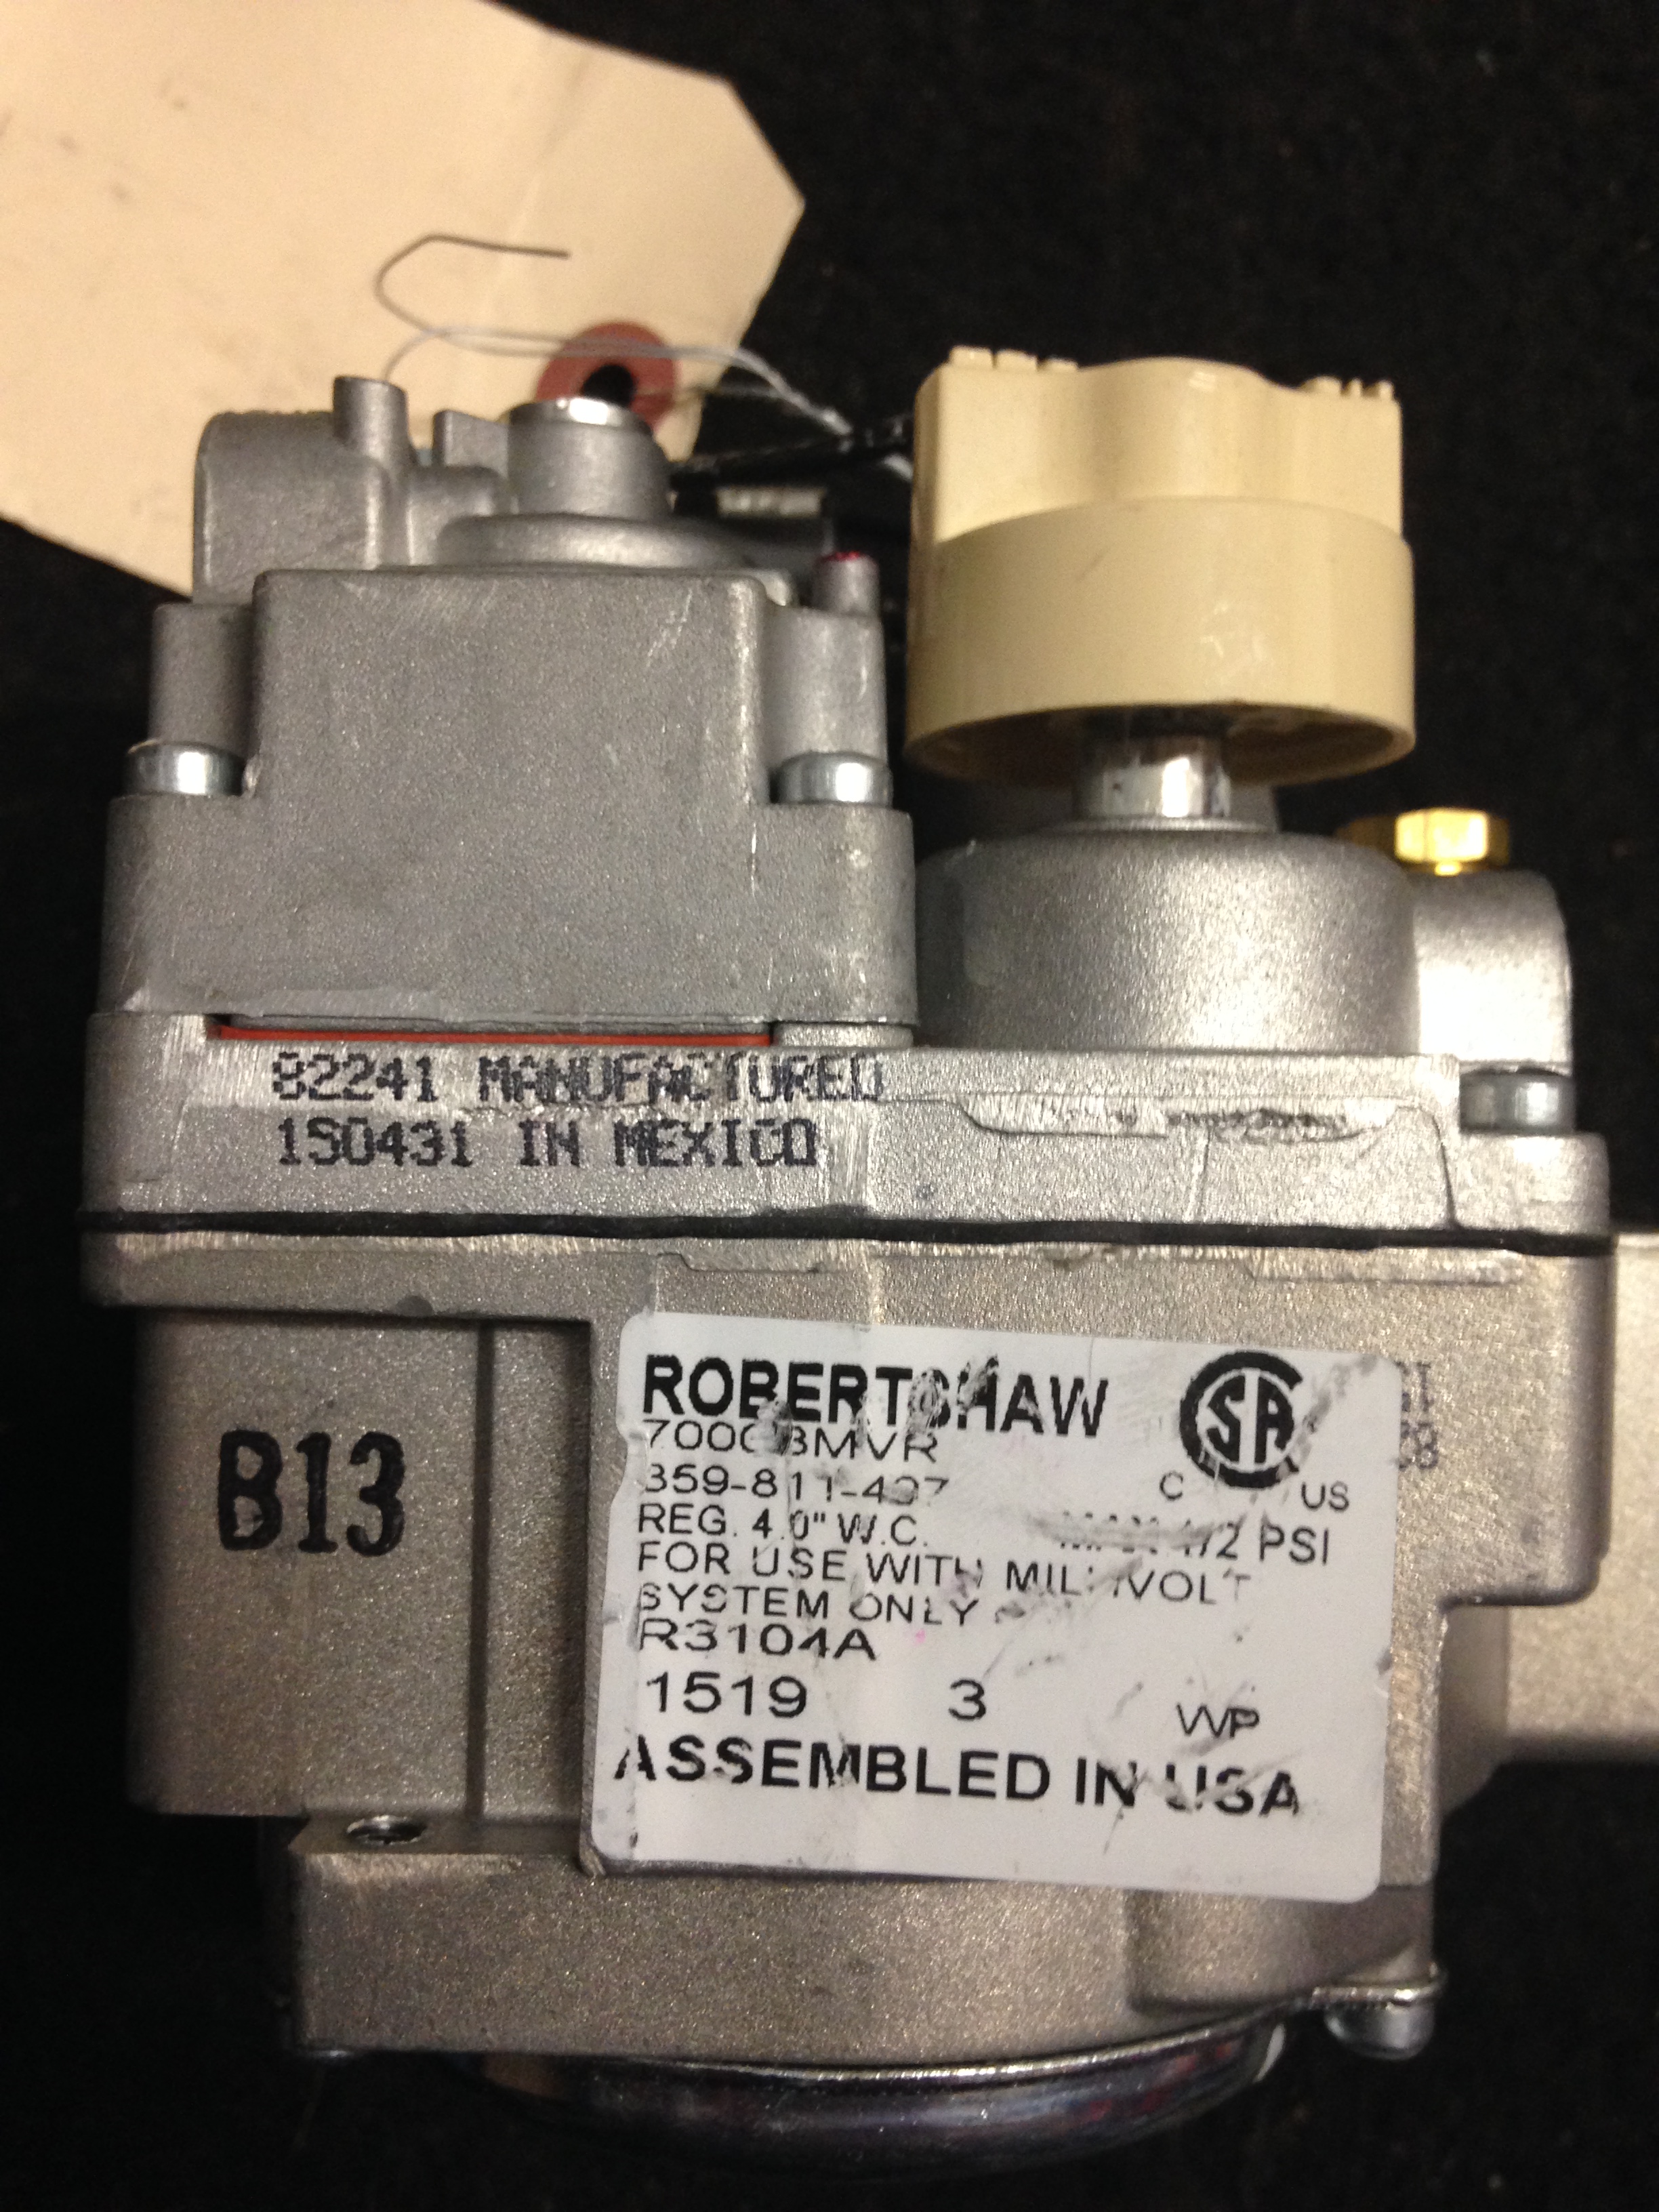 Thermopile-controlled Gas Valve part # R3104X